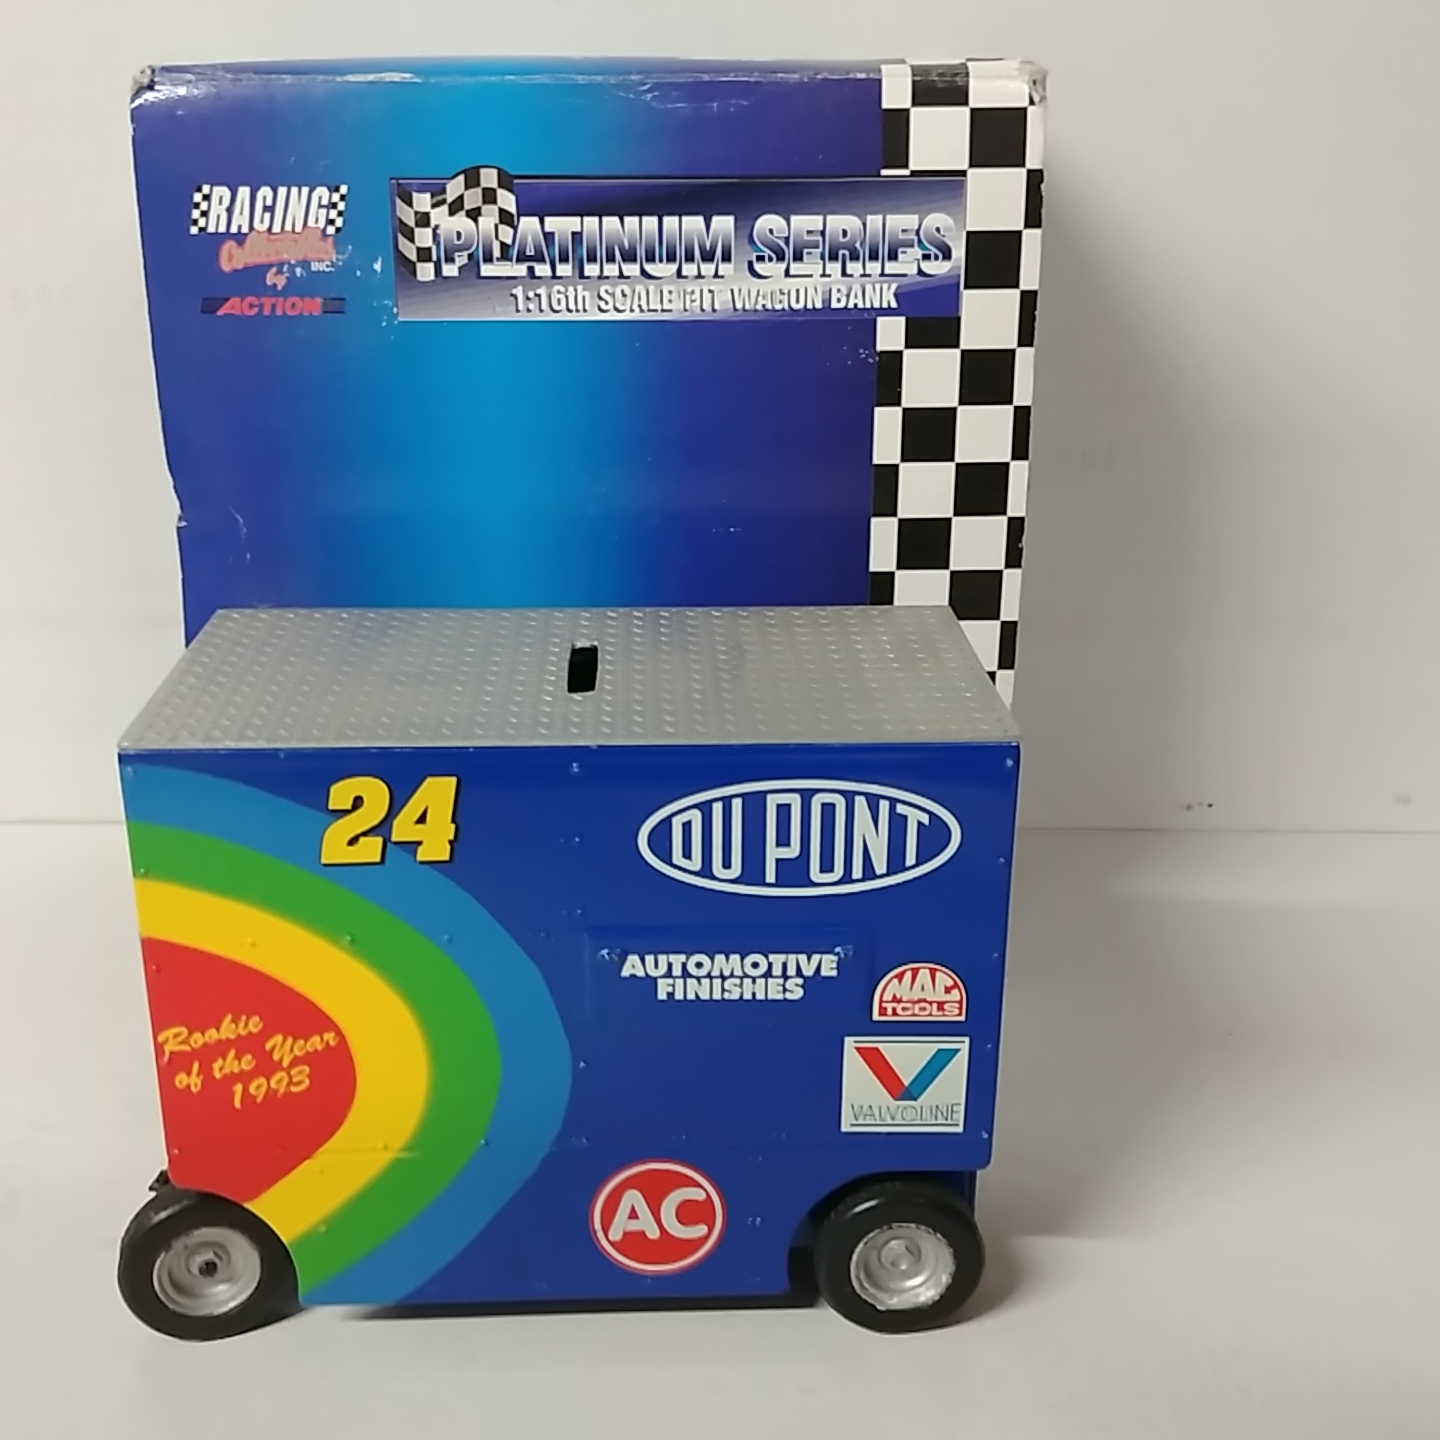 1994 Jeff Gordon 1/16th Dupont "93 Rookie of the Year" pit wagon bank